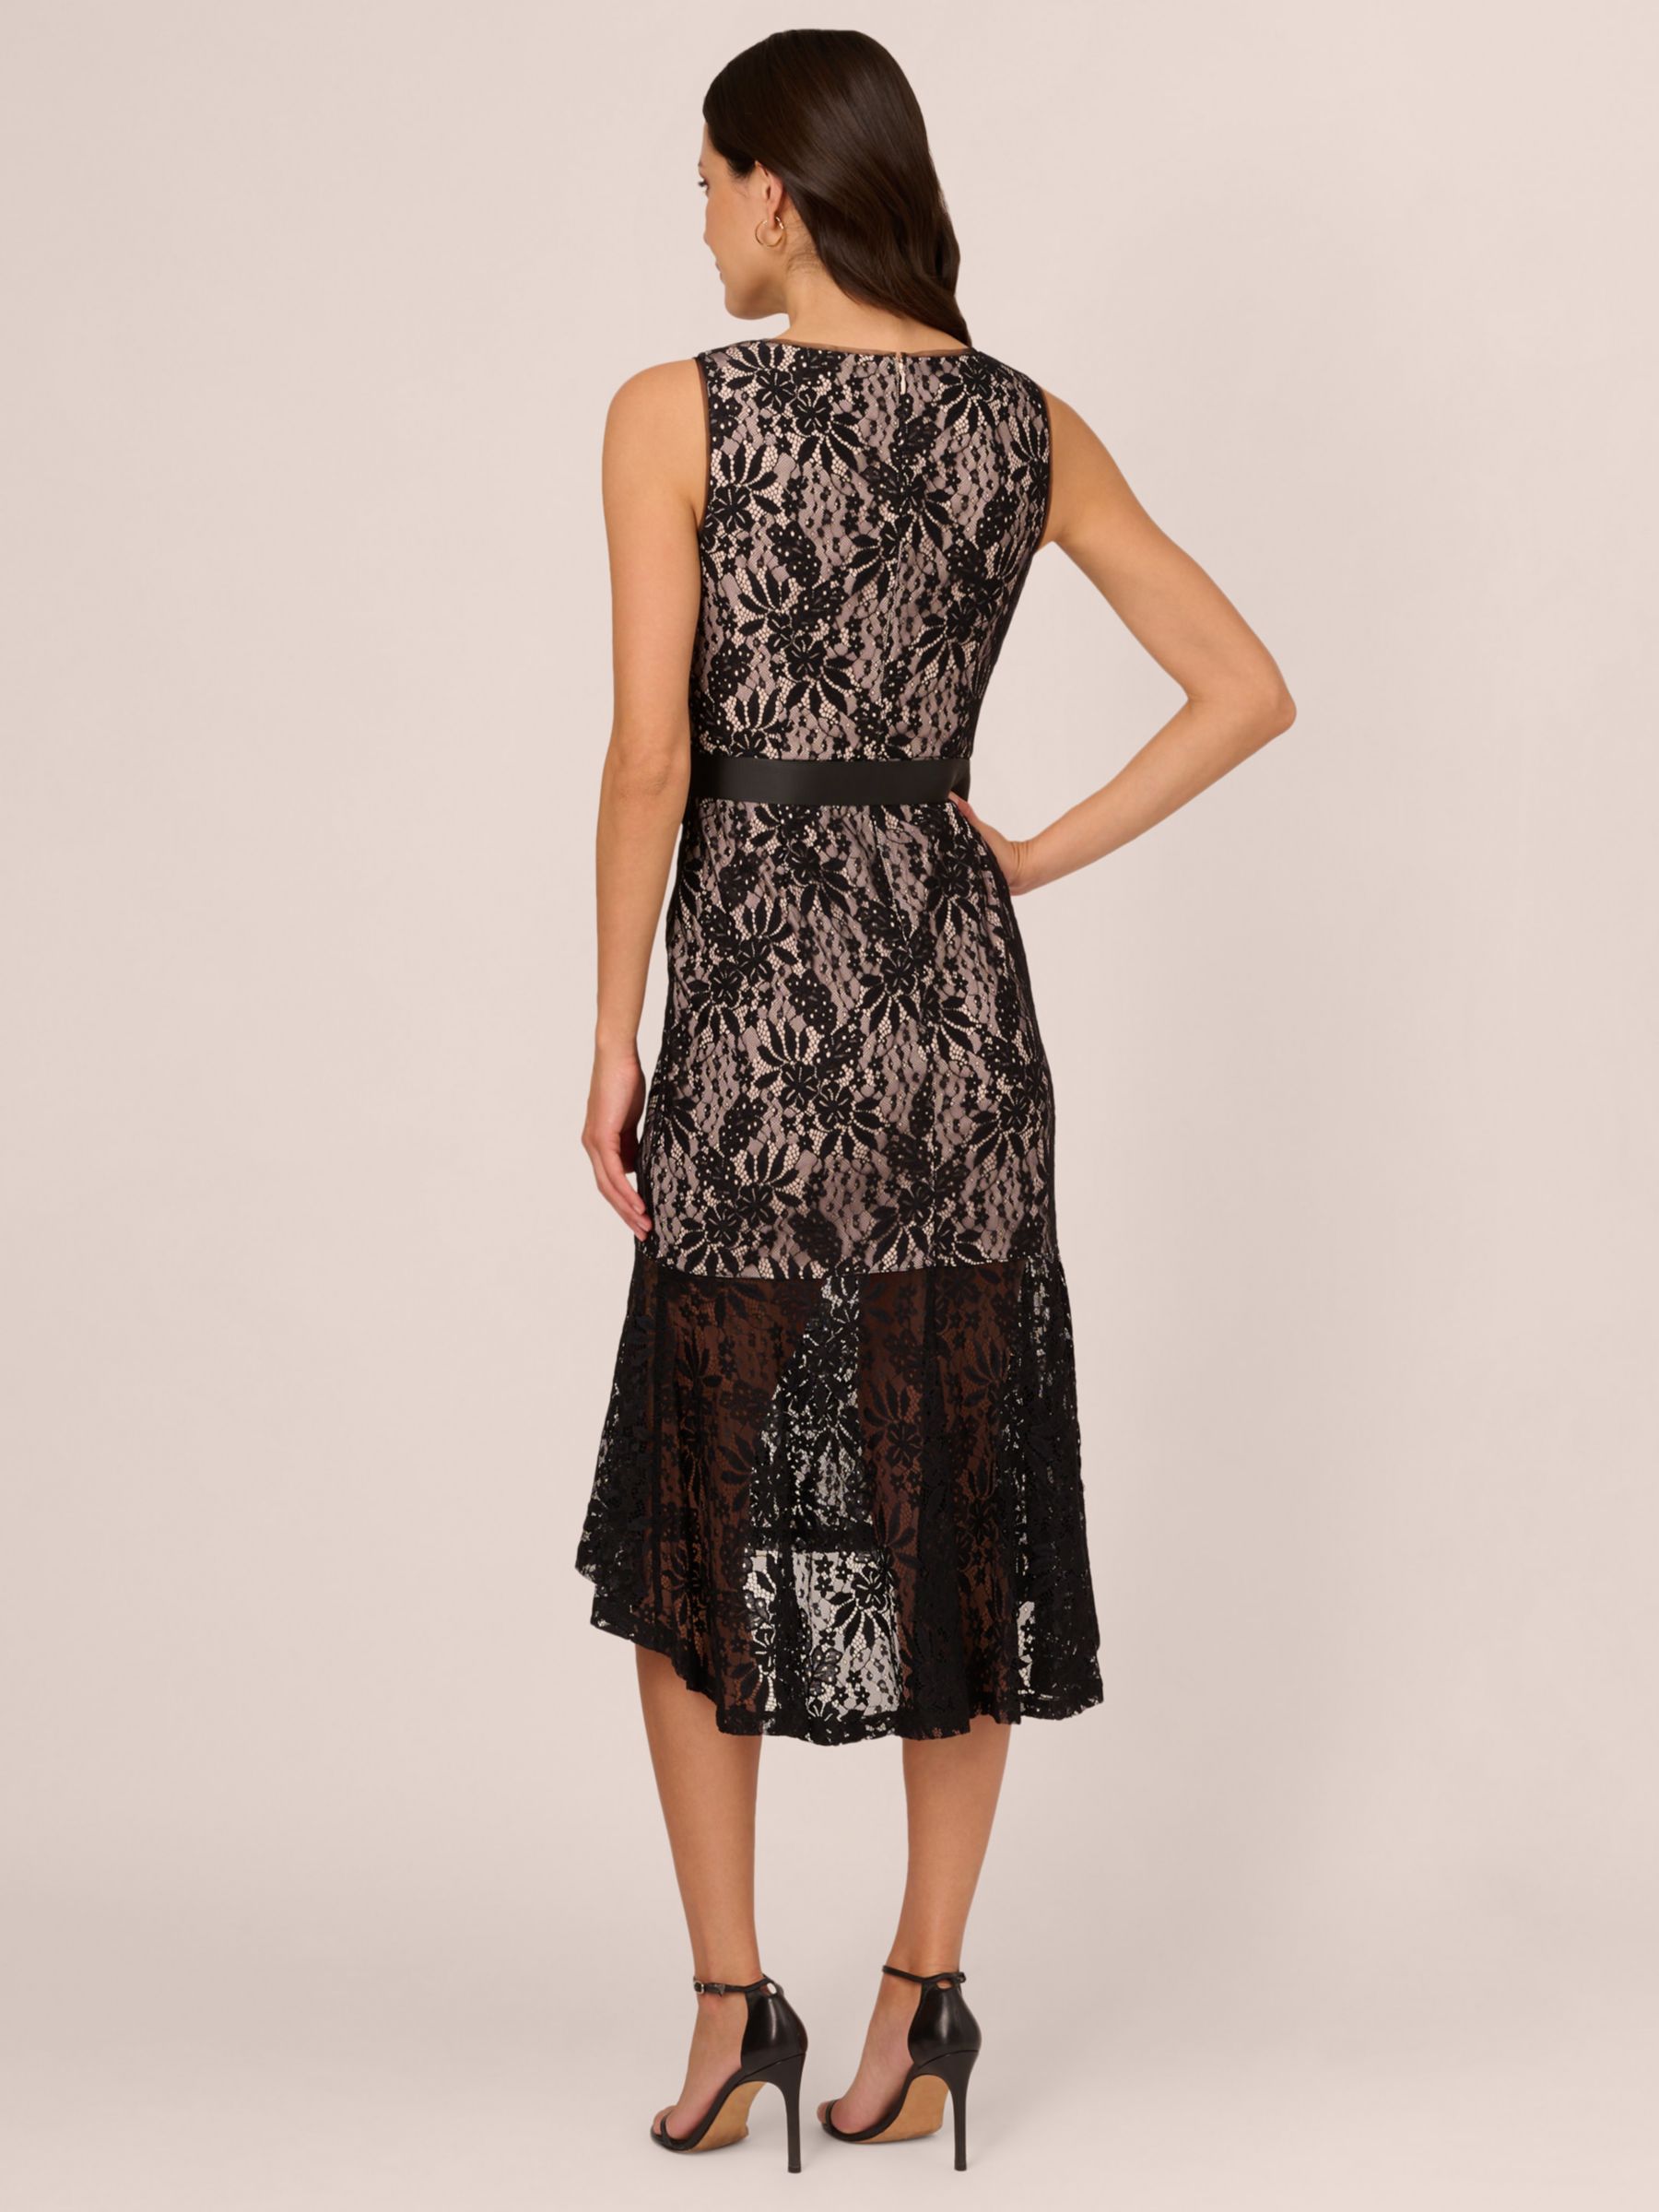 Buy Adrianna Papell Lace Flounce Midi Dress, Black Online at johnlewis.com